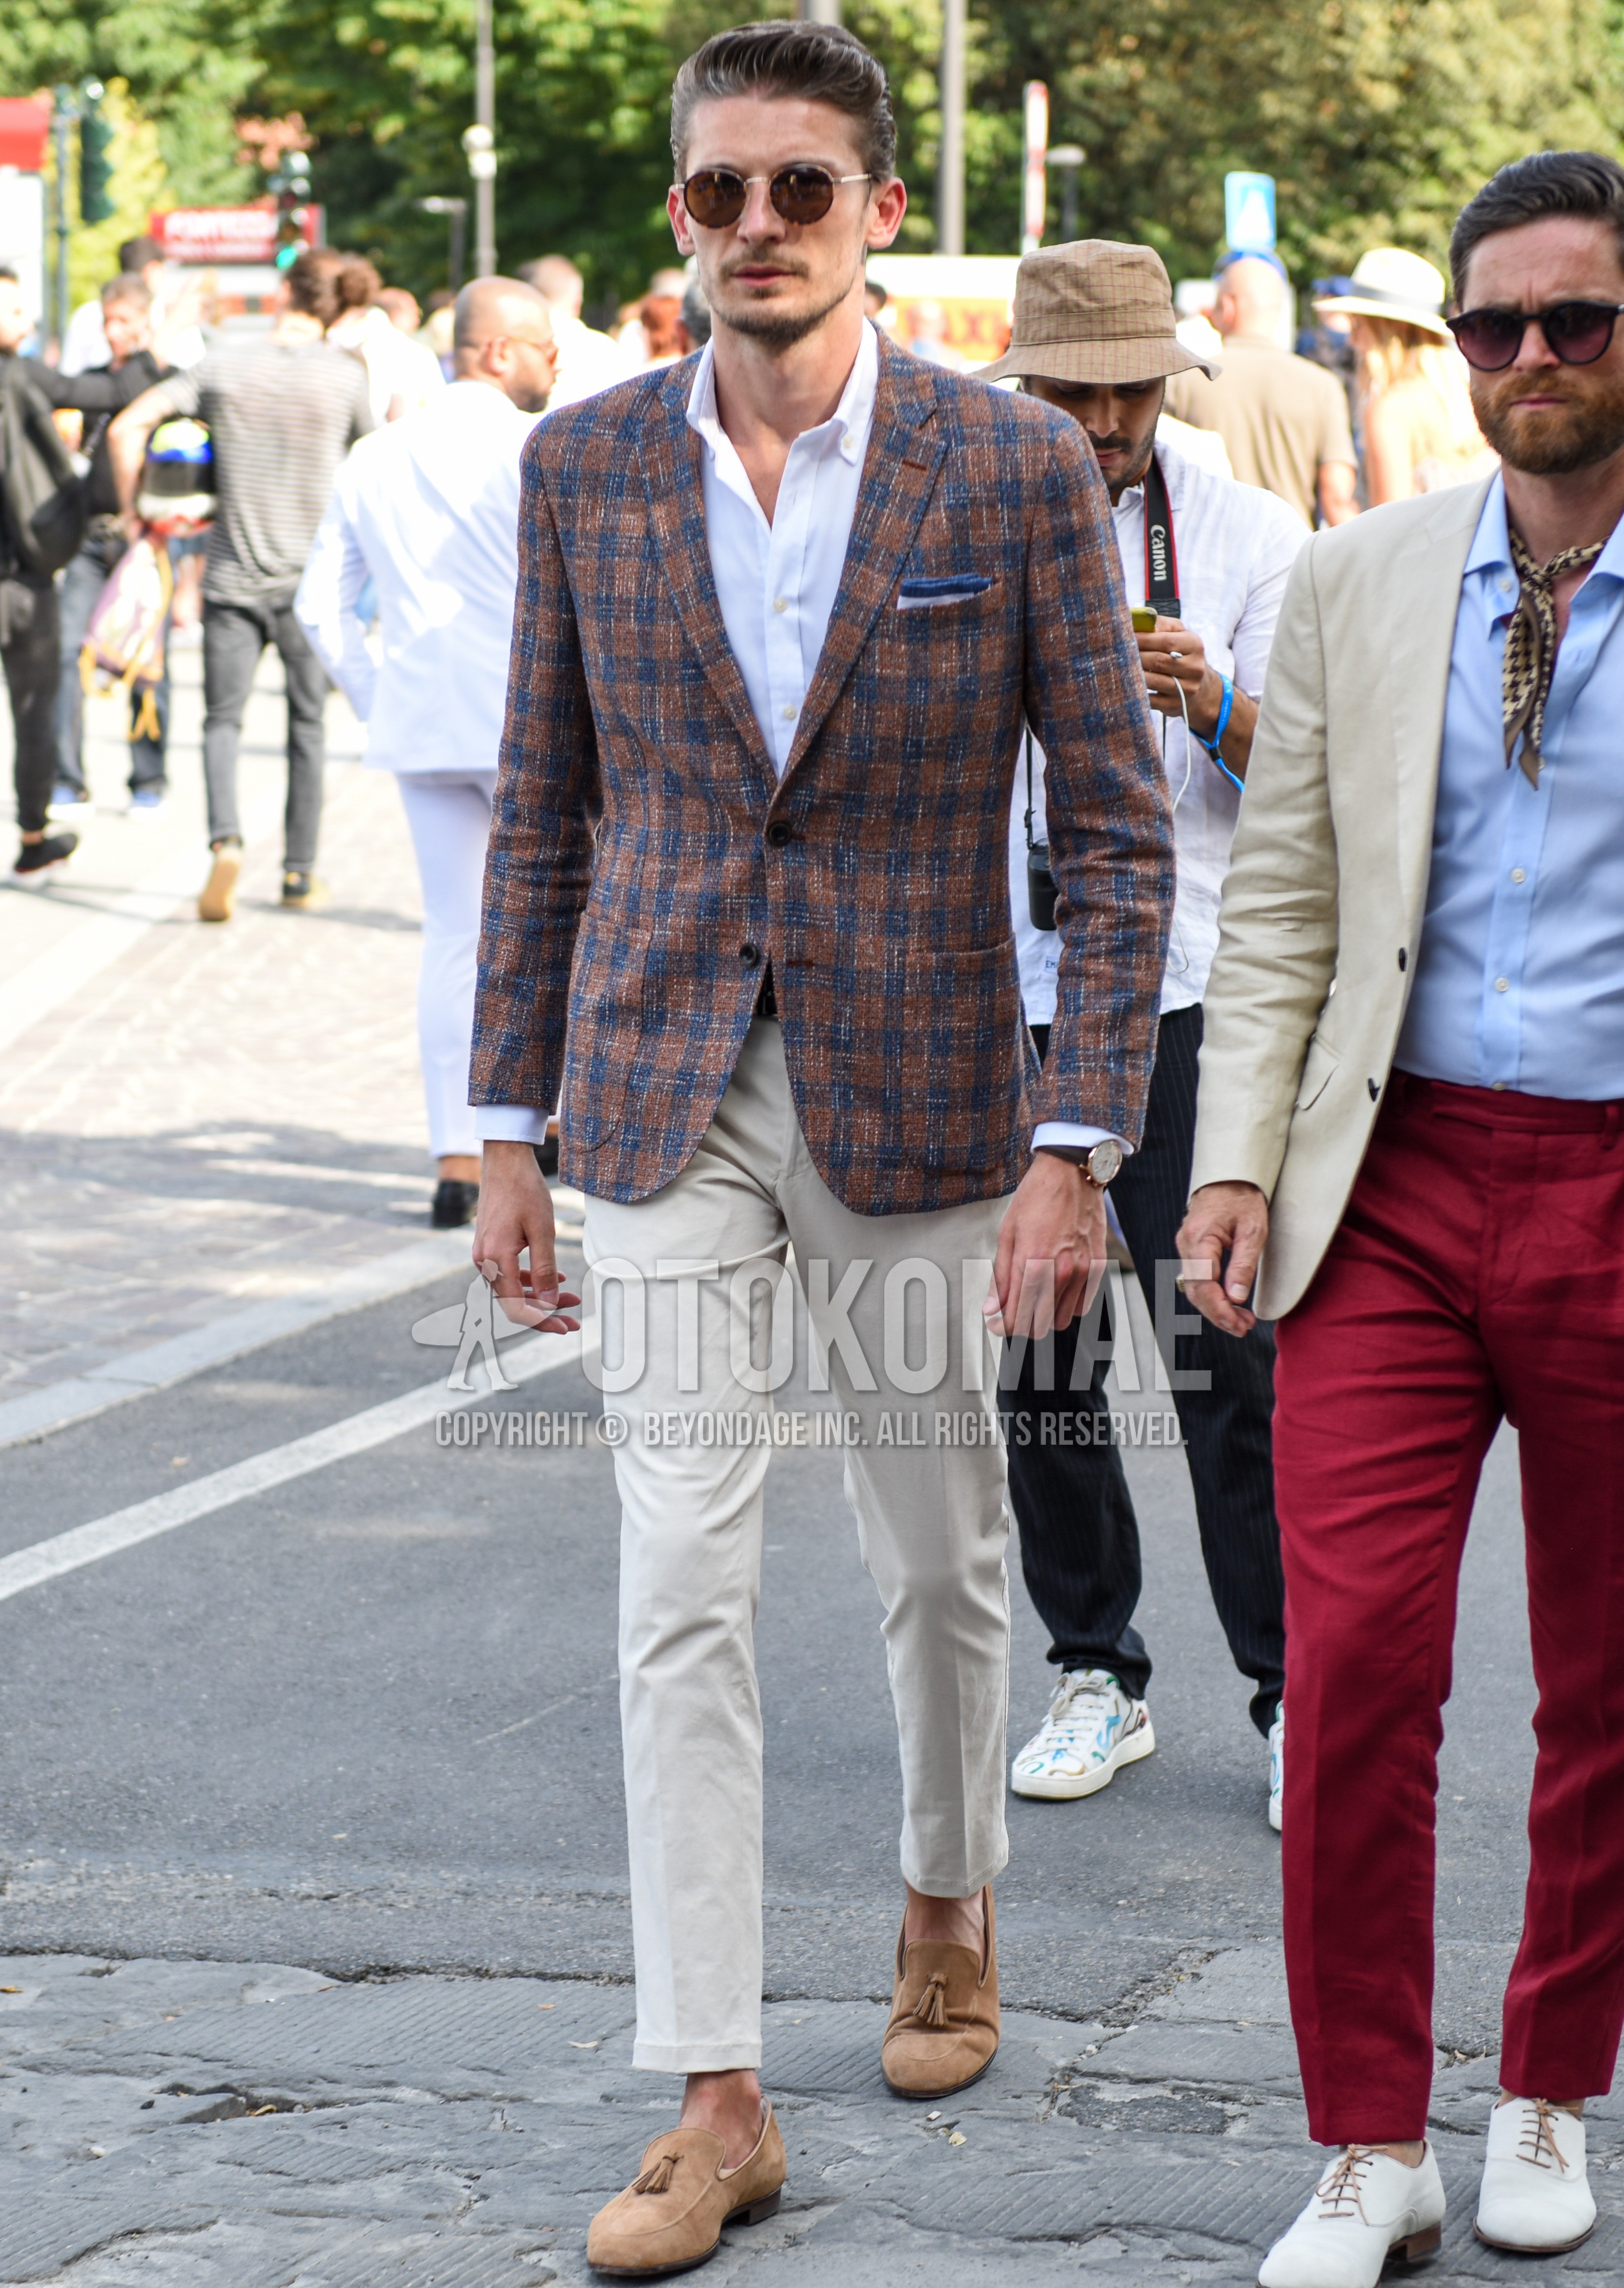 Men's spring summer autumn outfit with brown plain sunglasses, brown blue check tailored jacket, white plain shirt, white plain cotton pants, brown tassel loafers leather shoes.